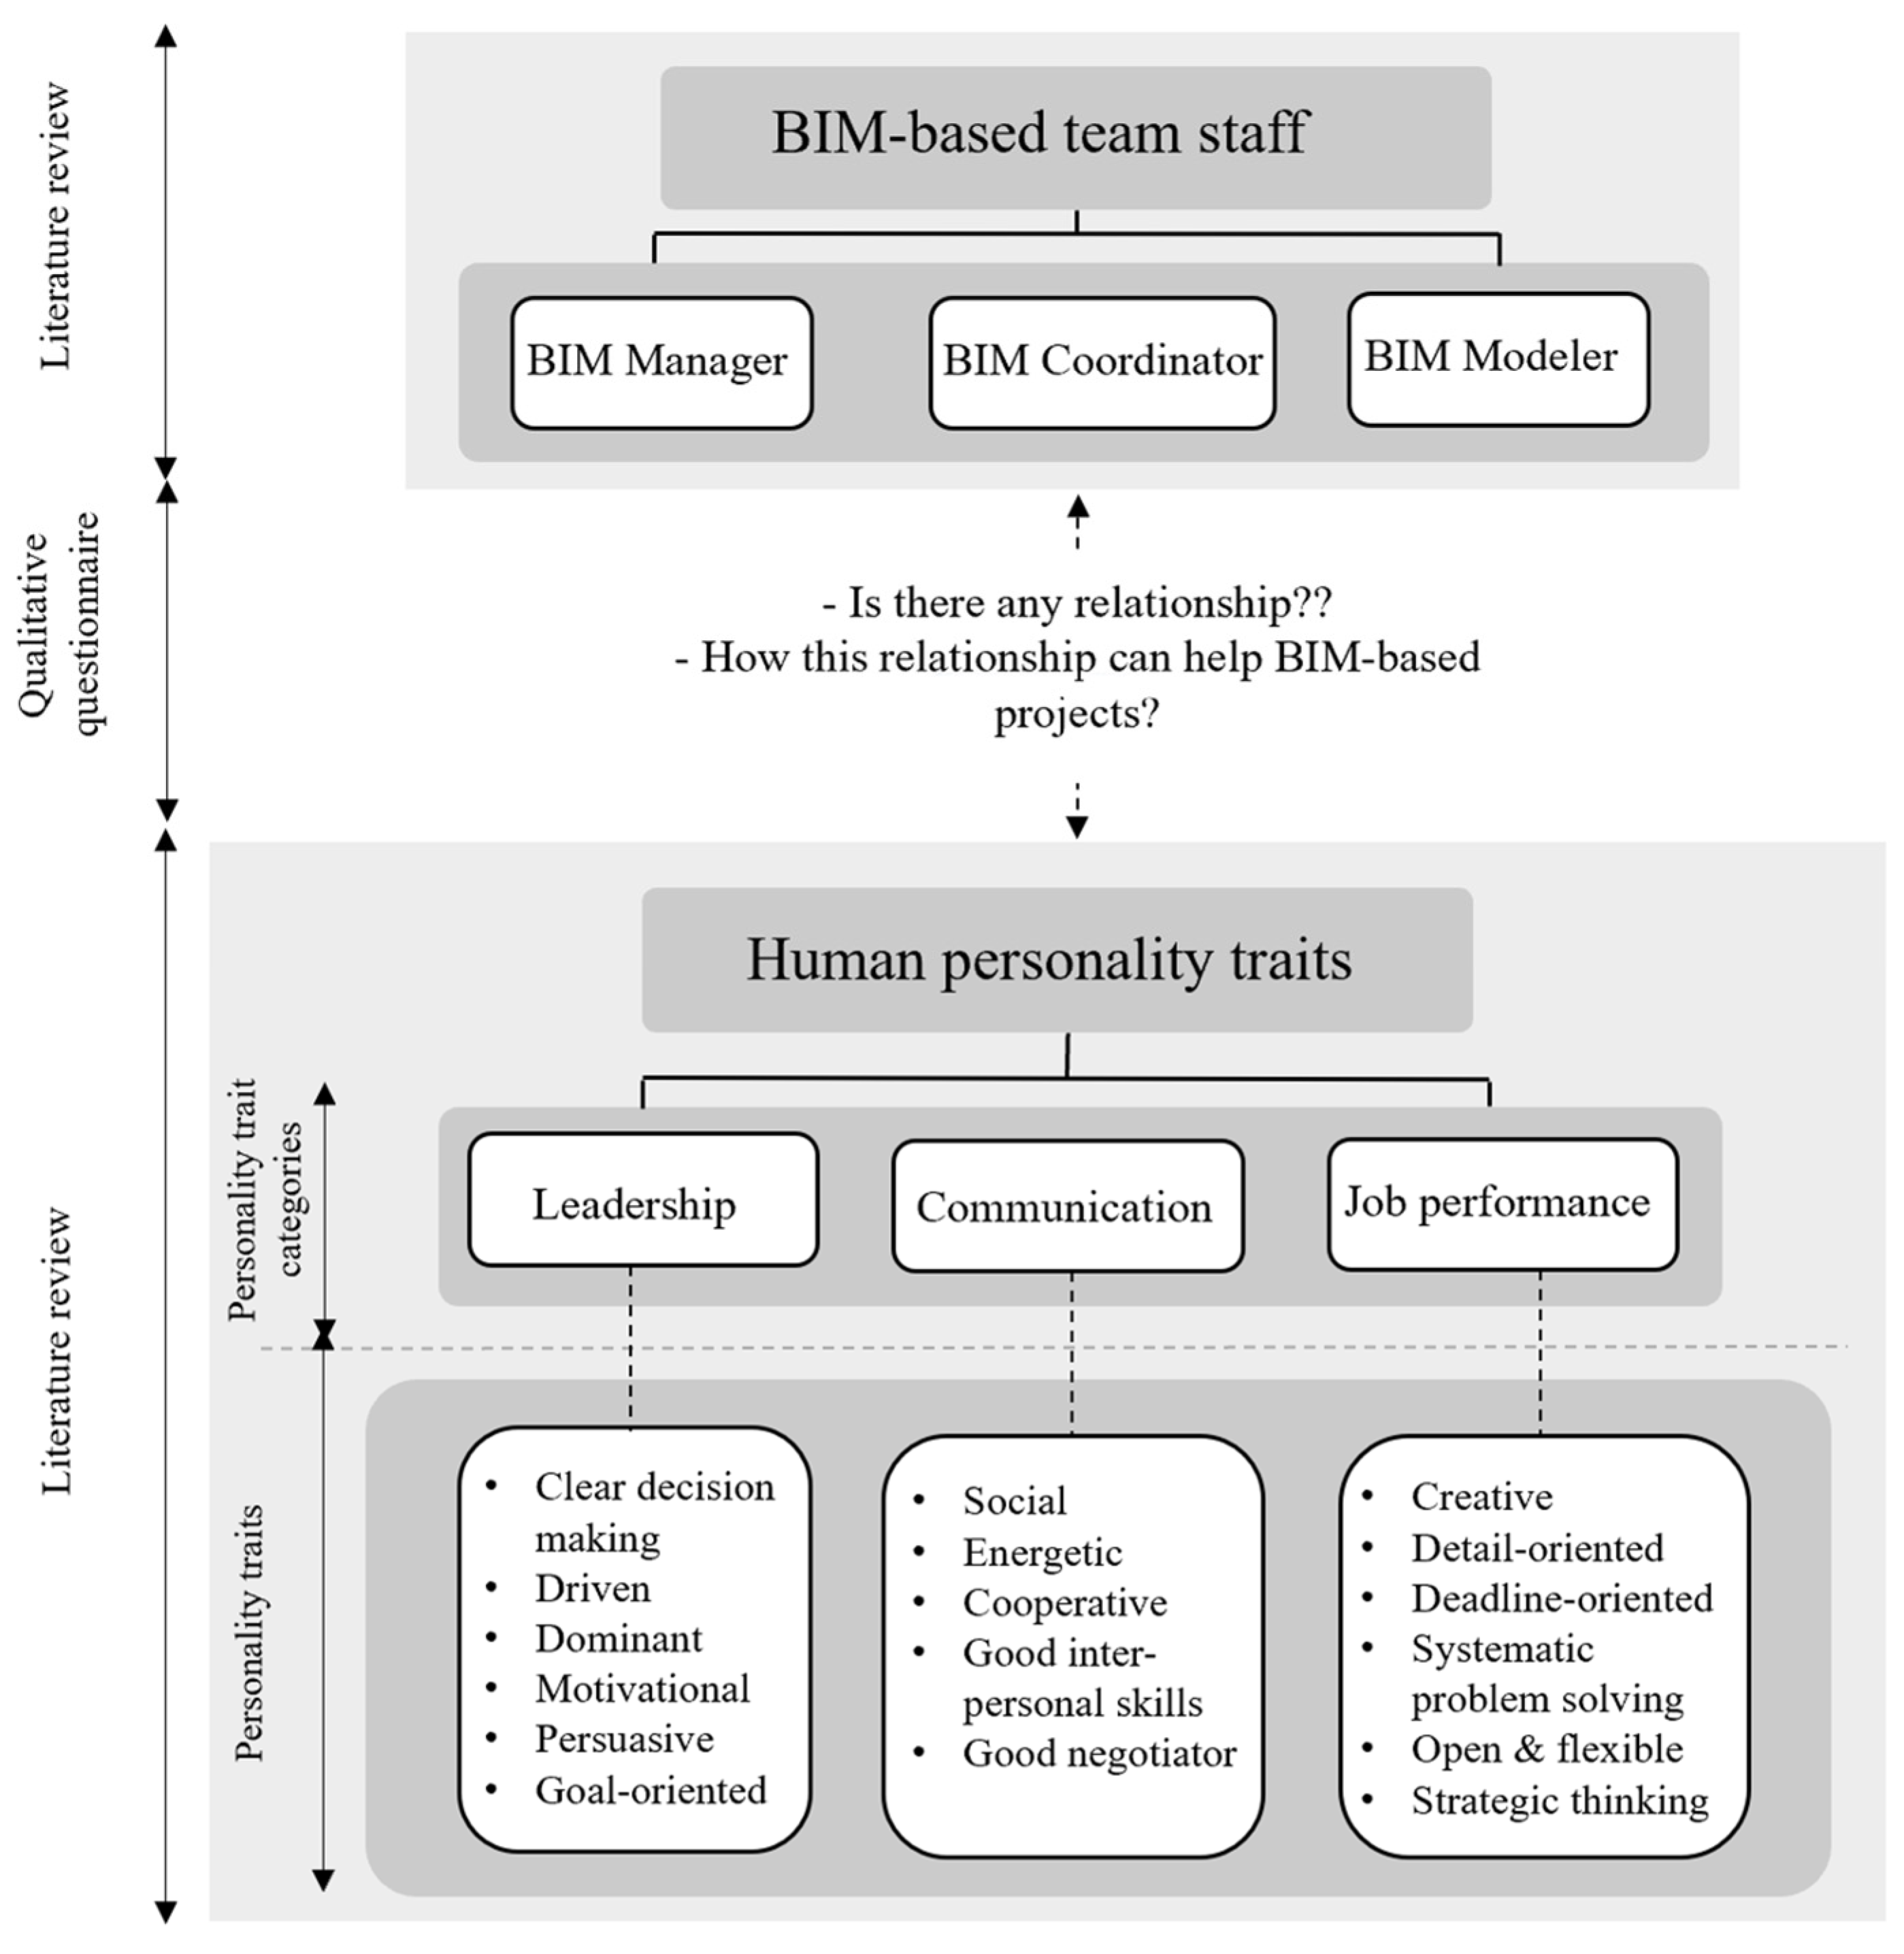 Buildings Free Full Text Qualitative Assessment Of Collaborative Behavior Based On Self Perception Personality Tests For Bim Staff Html